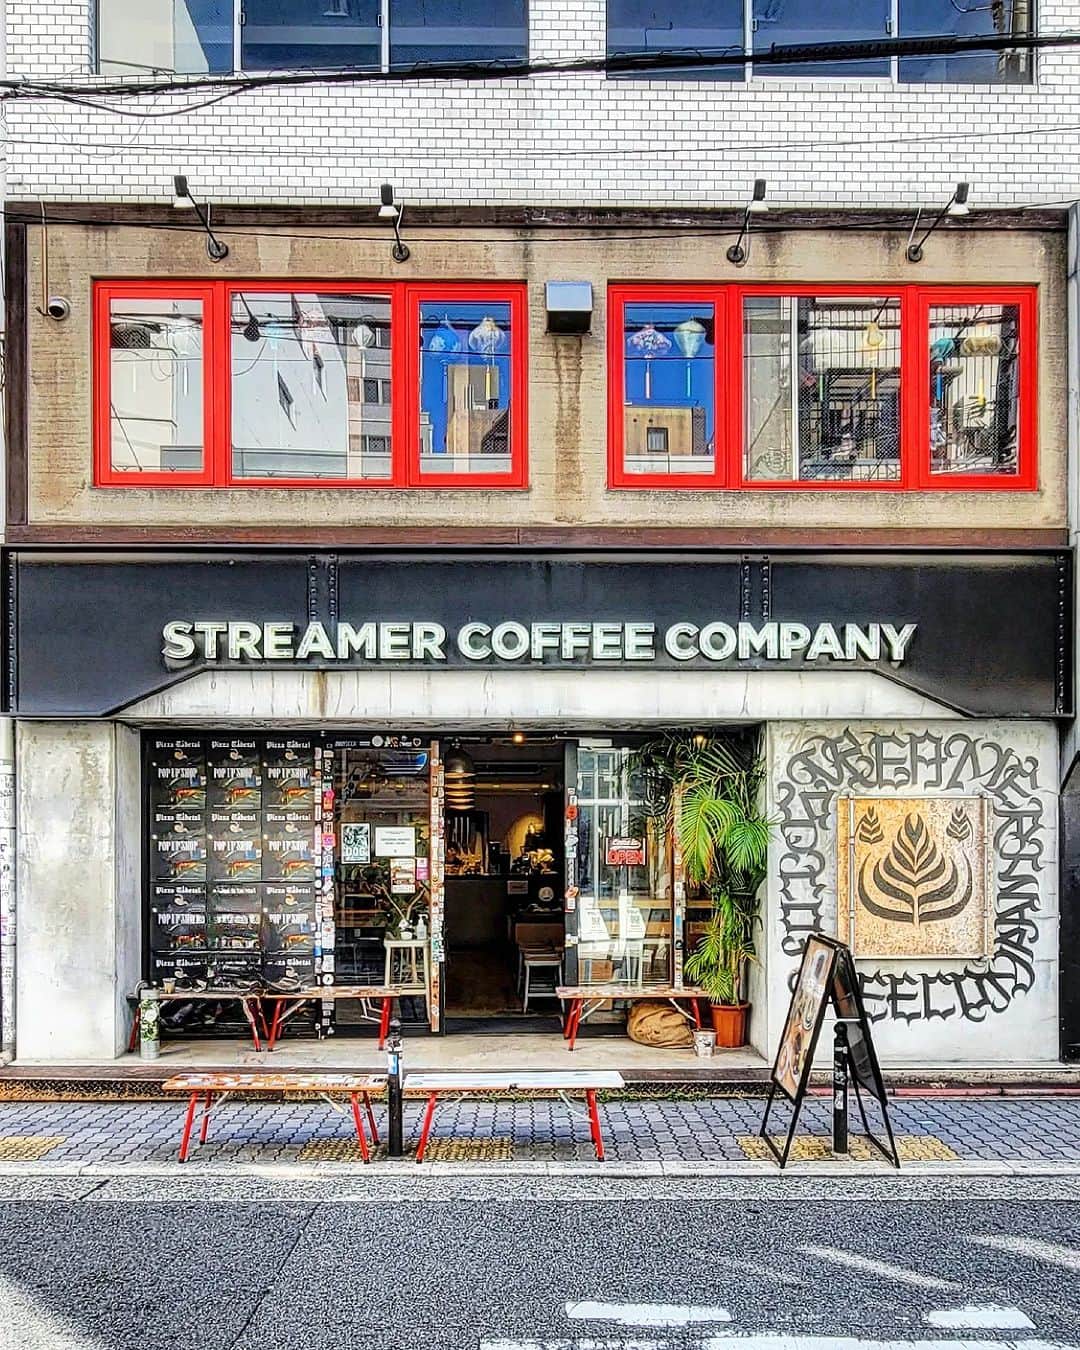 CAFE-STAGRAMMERのインスタグラム：「I'm sure that you all are probably coffee enthusiasts.  変わらないものは、きっと代わらないものになる♪  #心斎橋 #四ツ橋 #☕ #心斎橋カフェ #四ツ橋カフェ #shinsaibashi #STREAMERCOFFEECOMPANY心斎橋店 #ストリーマーコーヒーカンパニー心斎橋 #streamercoffeecompany #ストリーマーコーヒーカンパニー #cafetyo #osakacafe #カフェ #cafe #osaka #咖啡店 #咖啡廳 #咖啡 #카페 #คาเฟ่ #Kafe #coffeeaddict #カフェ部 #cafehopping #coffeelover #instacoffee #instacafe #大阪カフェ部 #sharingaworldofshops」